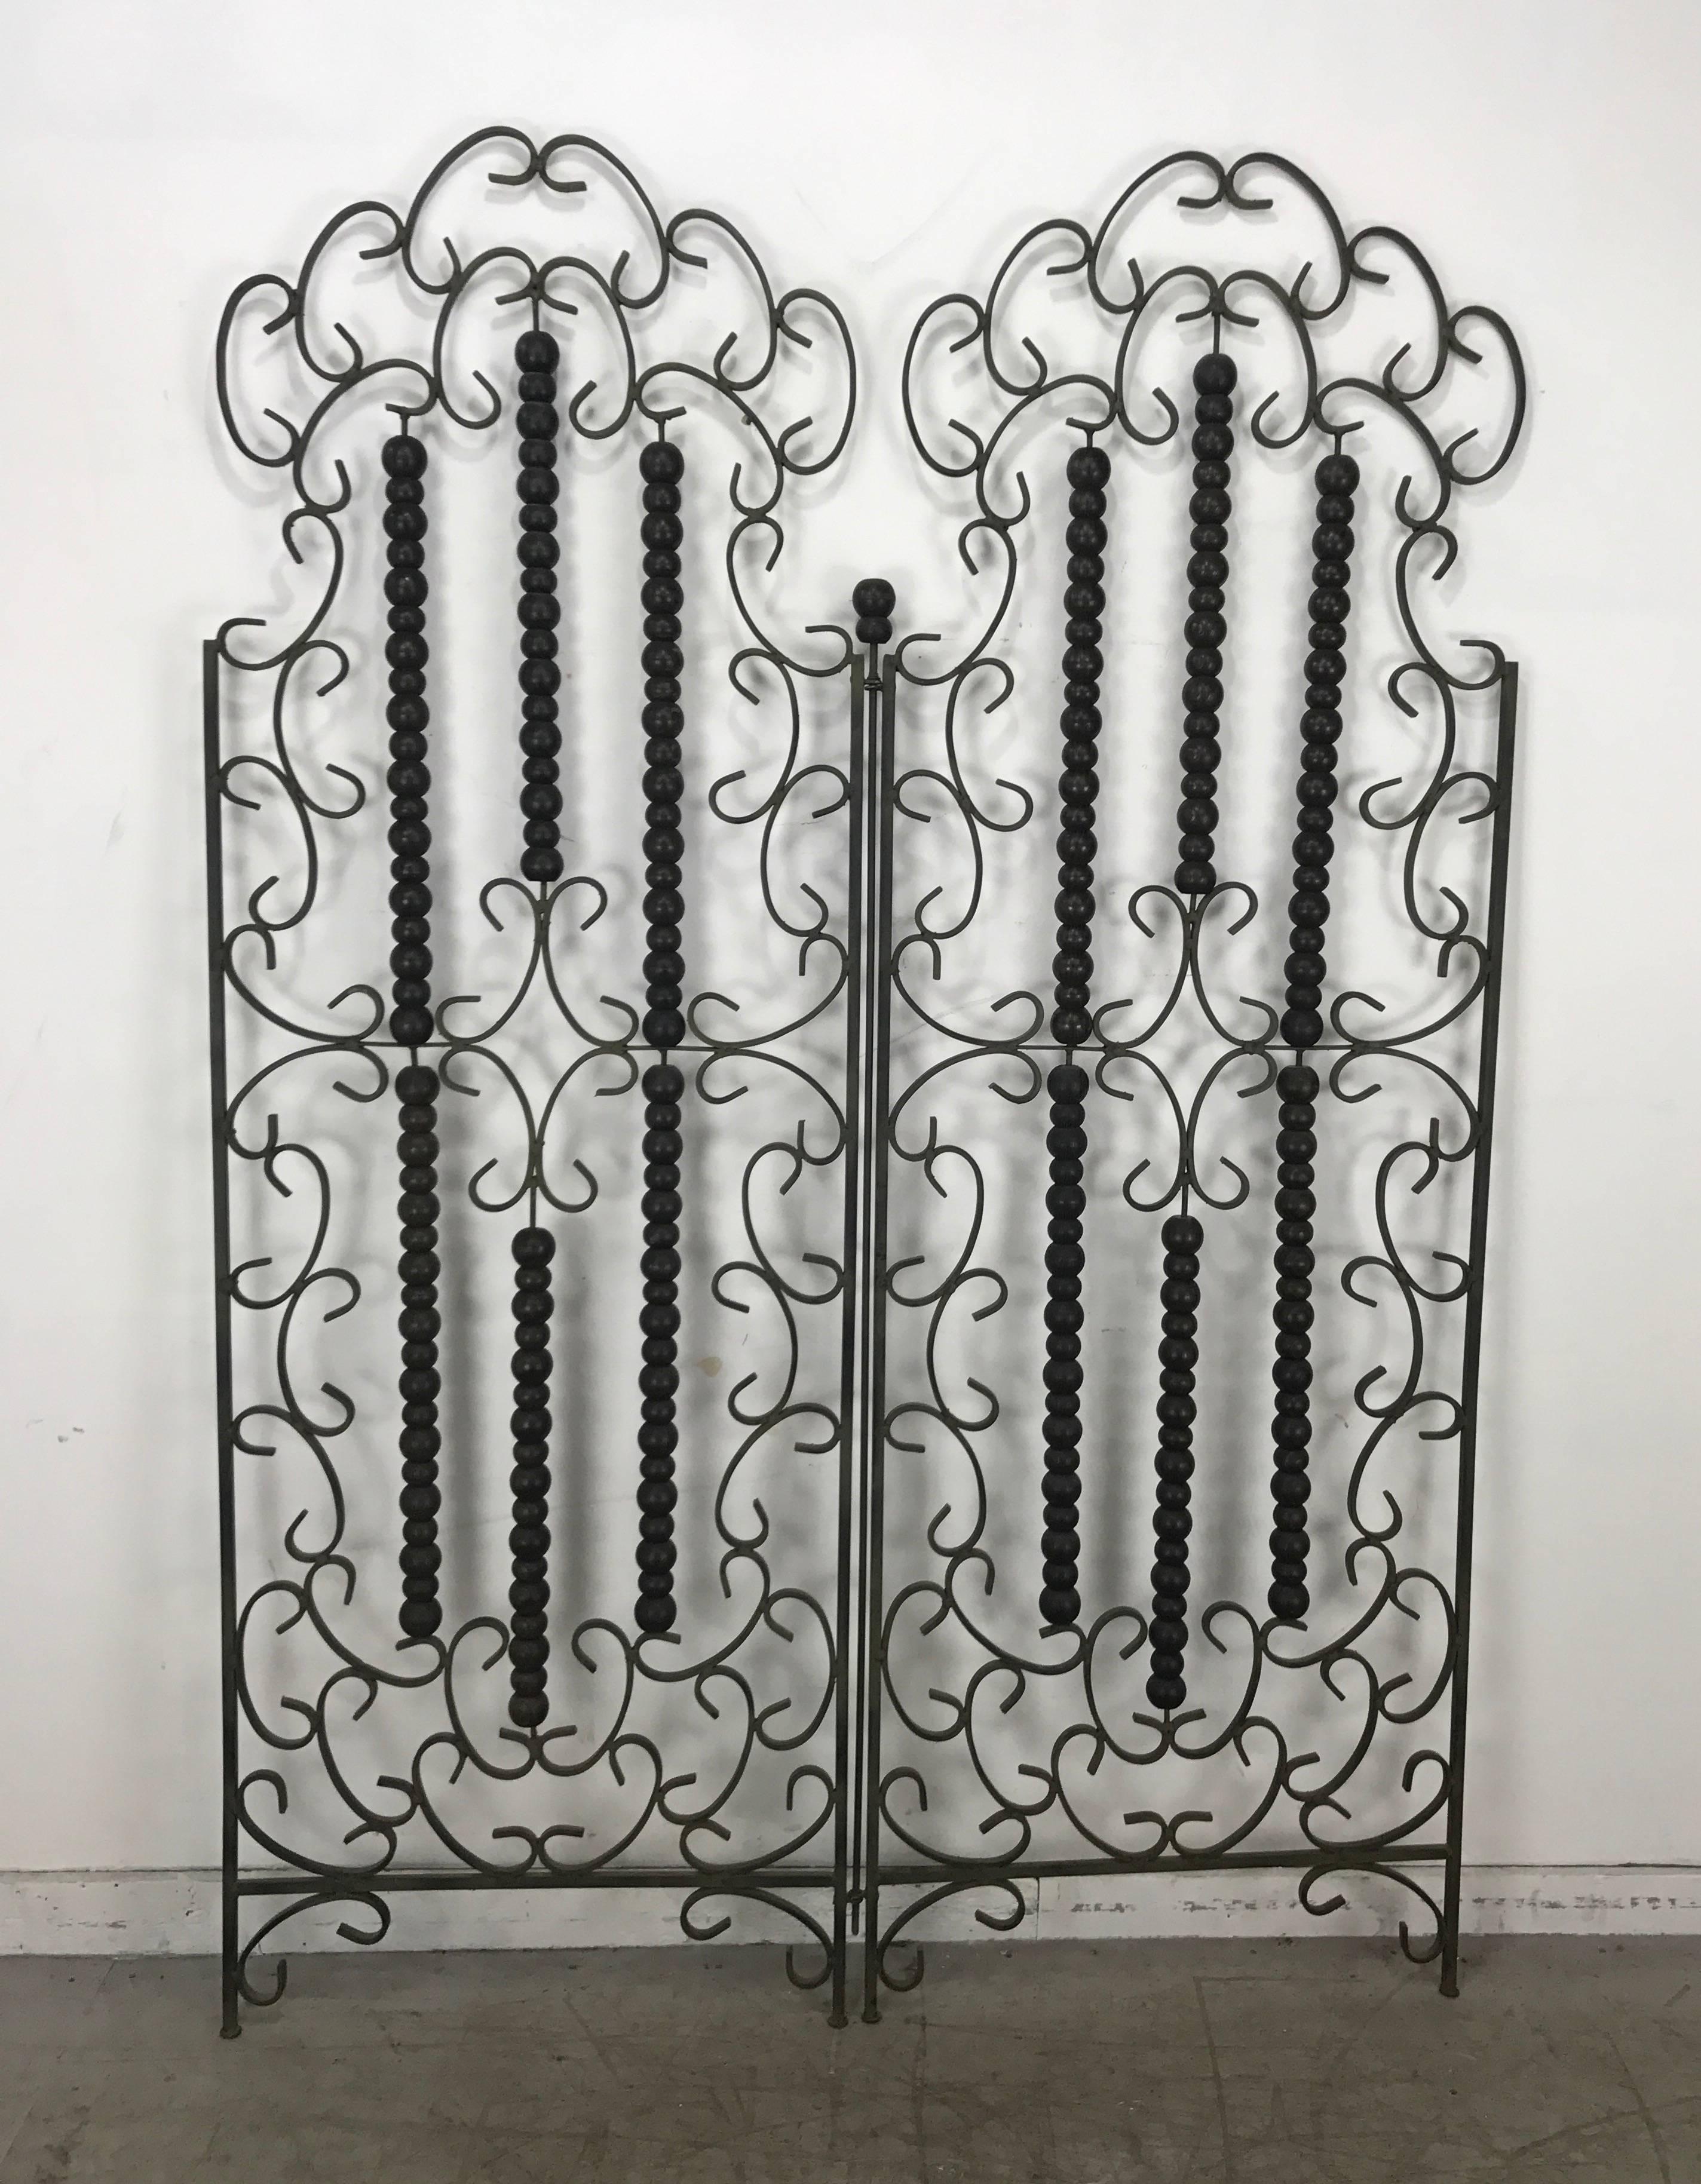 Wrought iron and wood (balls) Mediterranean Modern folding screen or divider. Wonderful bronzed verde green patina, bi-fold, hand delivery available to New York City or anywhere en route from Buffalo Ny.